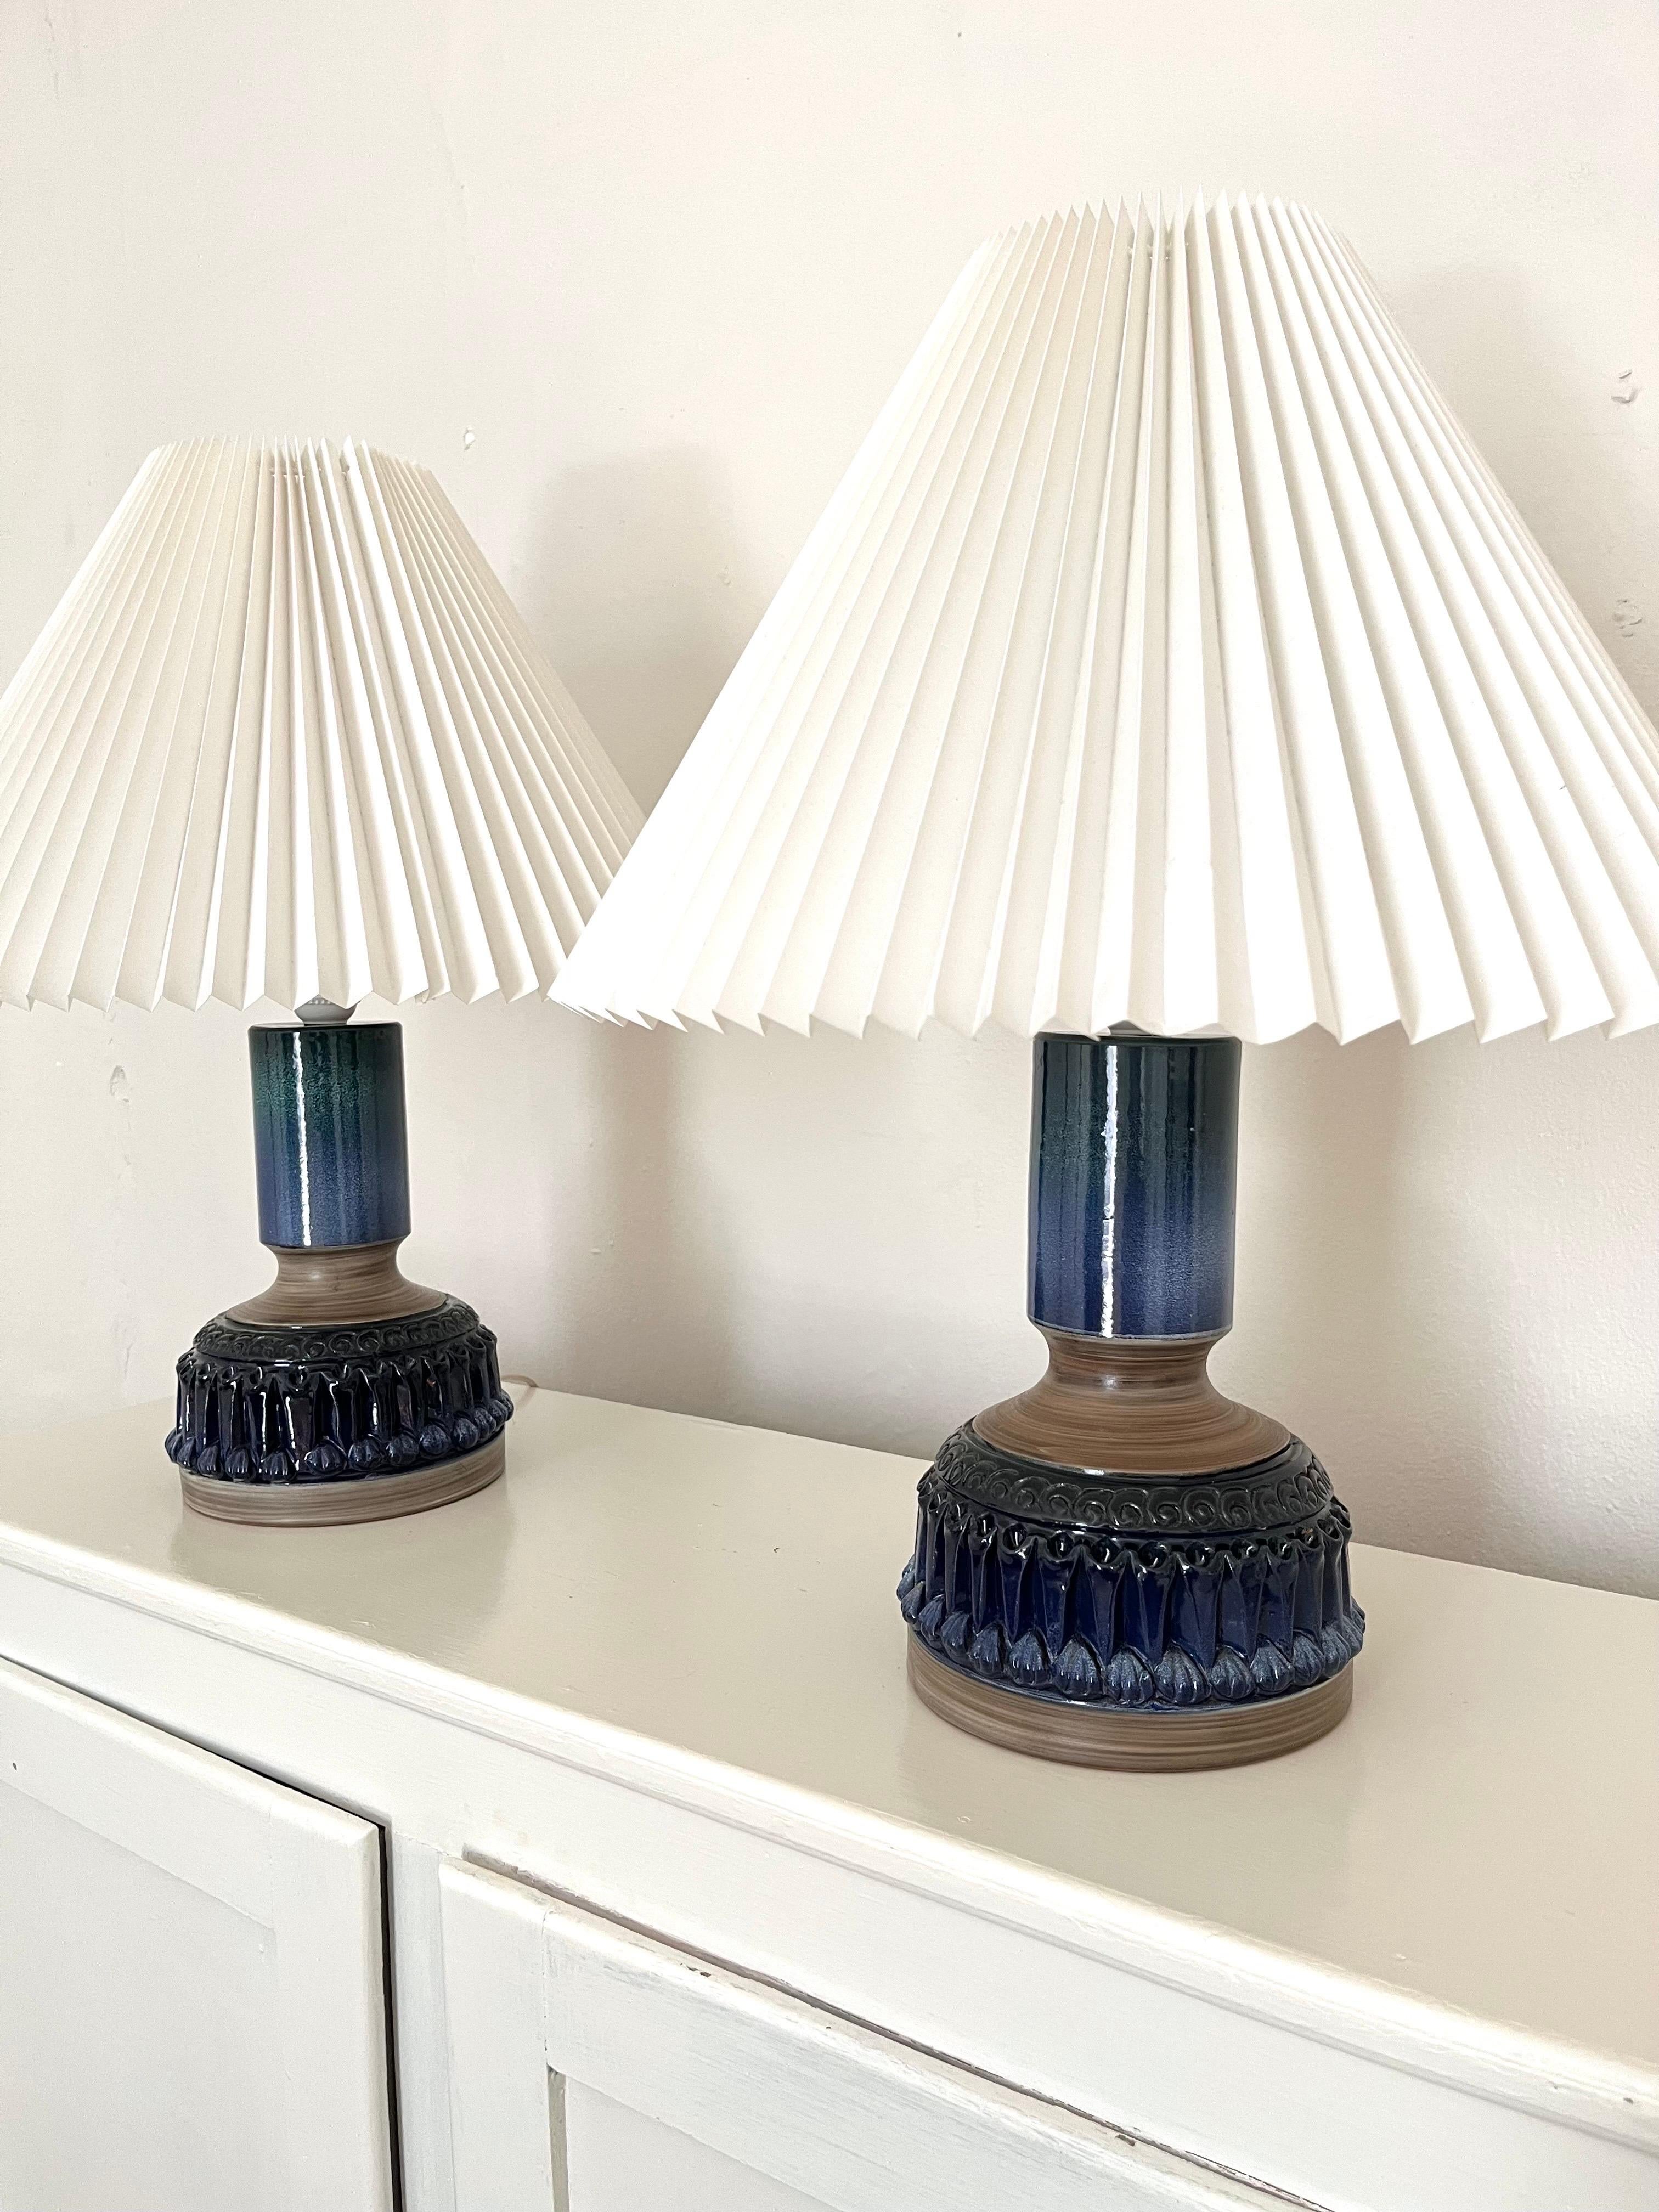 Pair of Vintage Italian Ceramic Table Lamps, 1960s In Good Condition For Sale In Frederiksberg C, DK